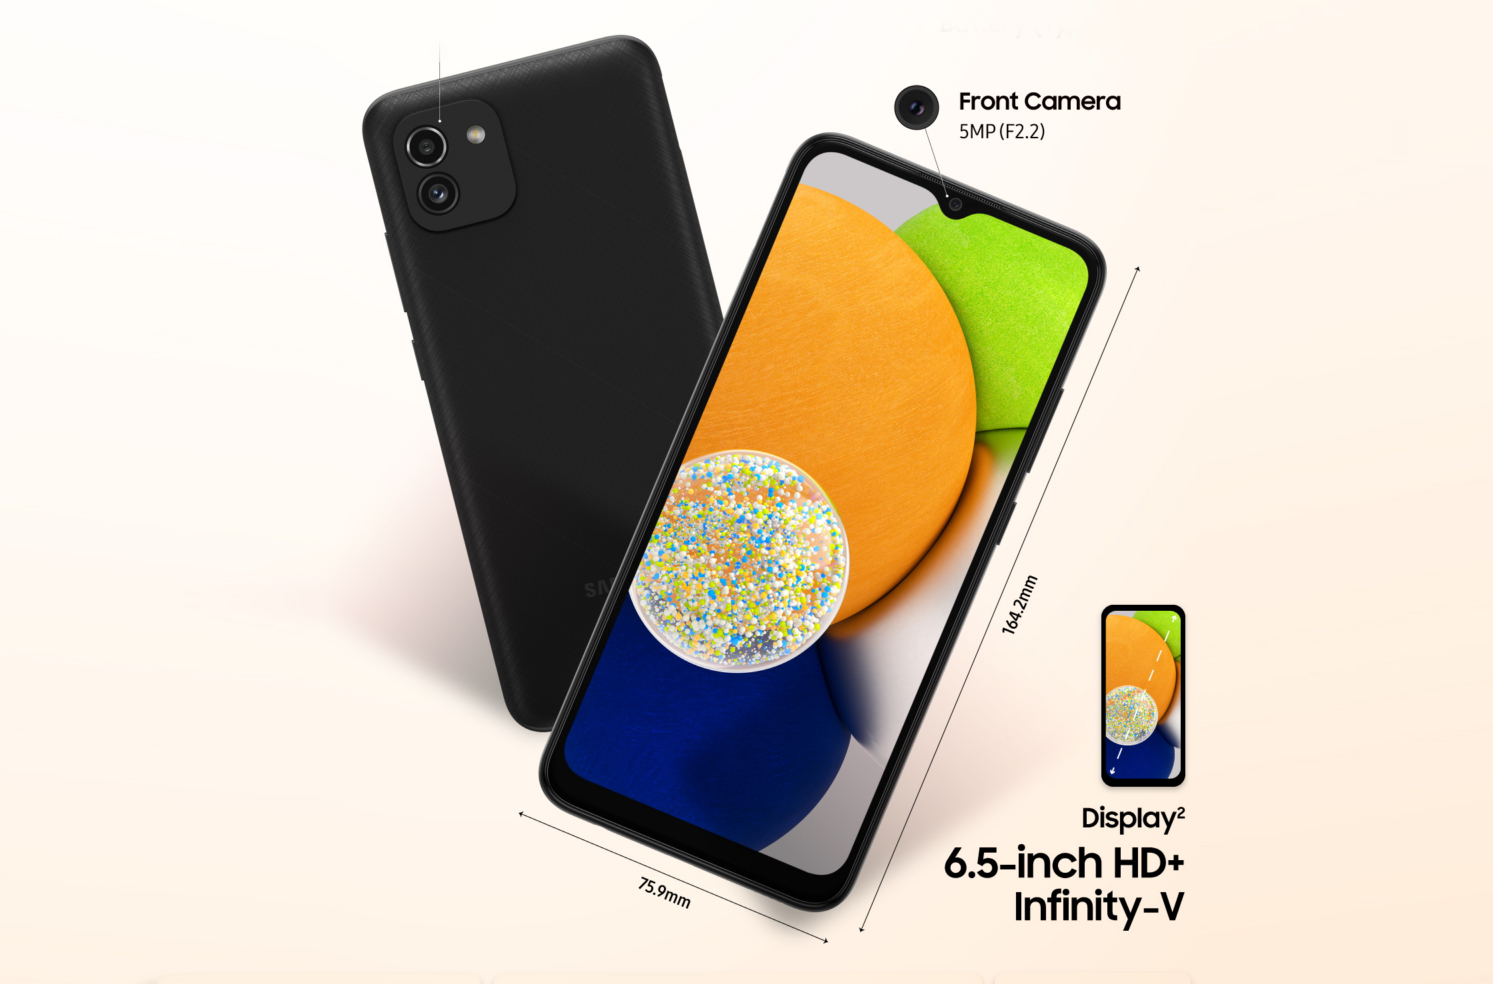 Meerdere Vrijwillig Integratie Samsung unveils the Galaxy A03, an affordable smartphone with an octa-core  processor, a 48 MP primary camera and a 5,000 mAh battery -  NotebookCheck.net News